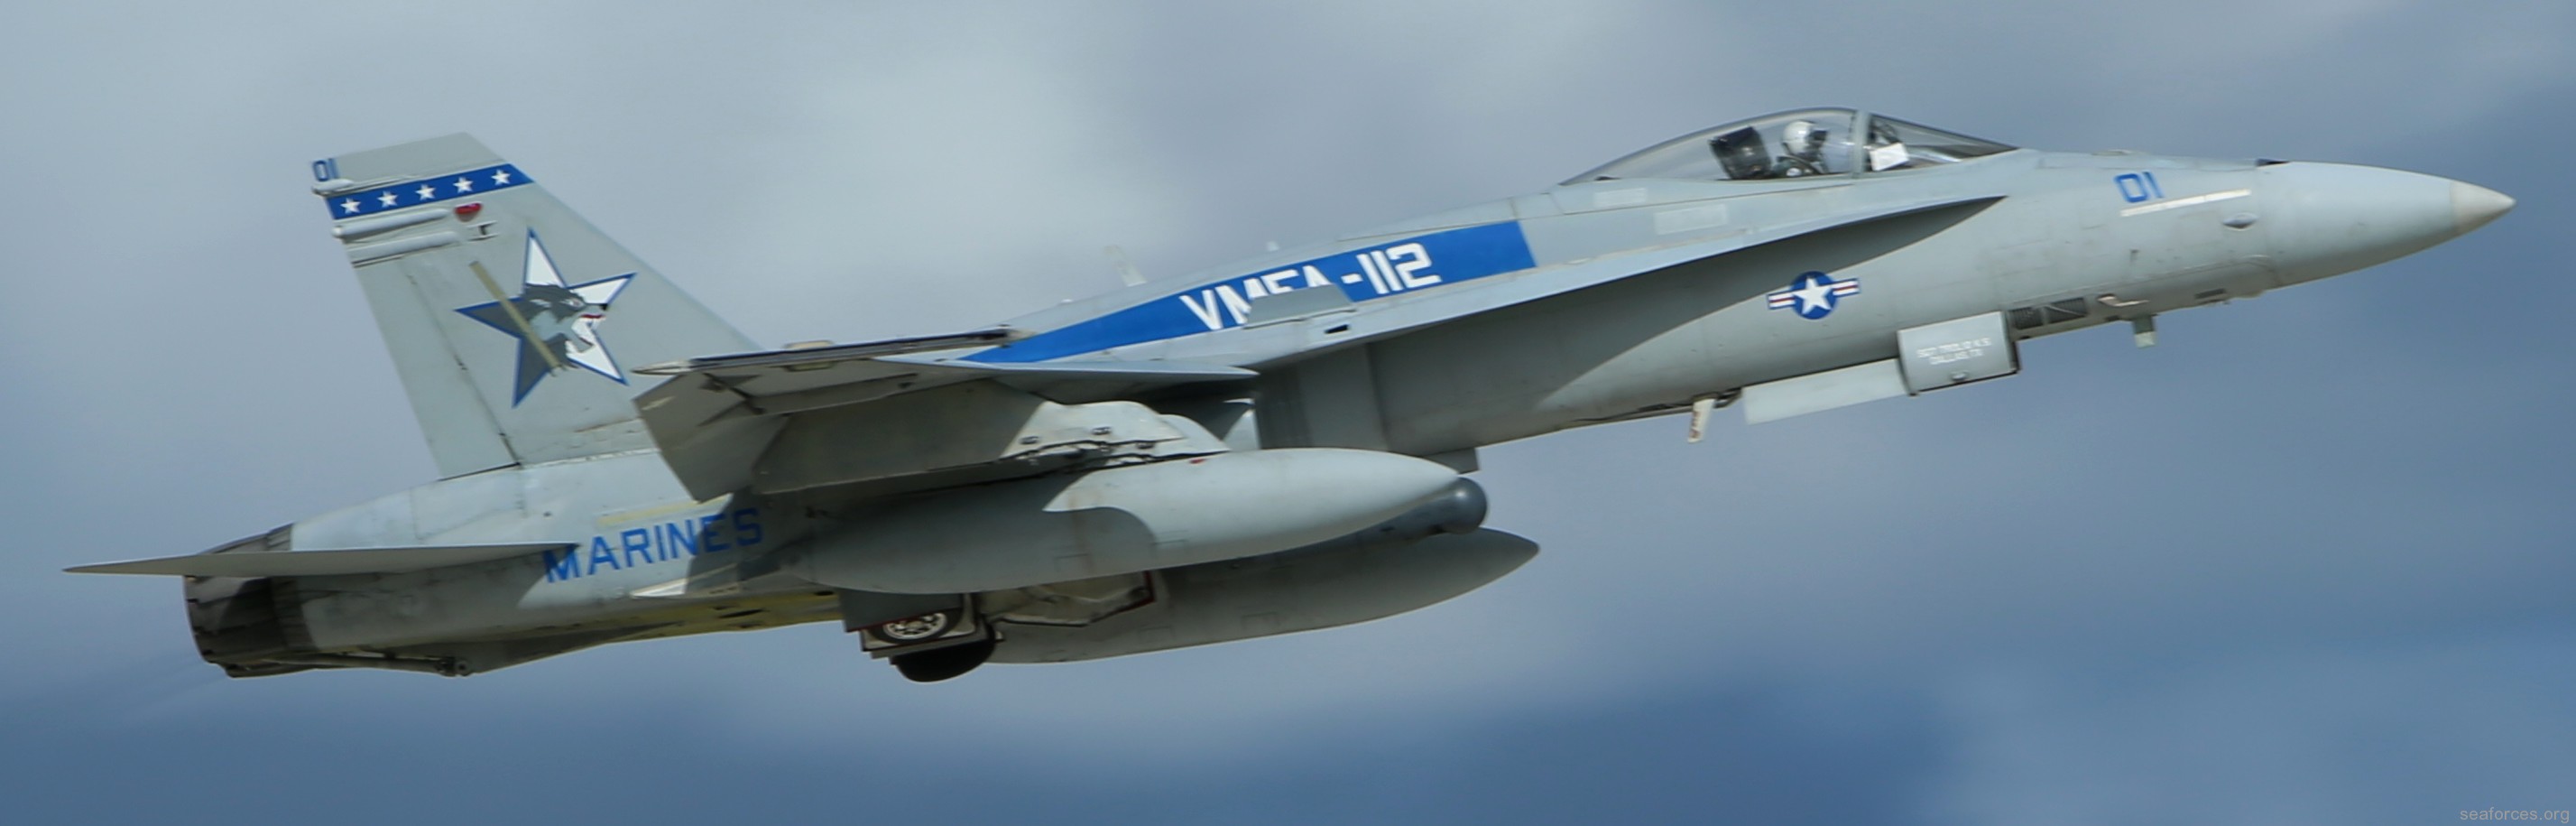 vmfa-112 cowboys marine fighter attack squadron f/a-18a+ hornet 22 andersen air force base guam